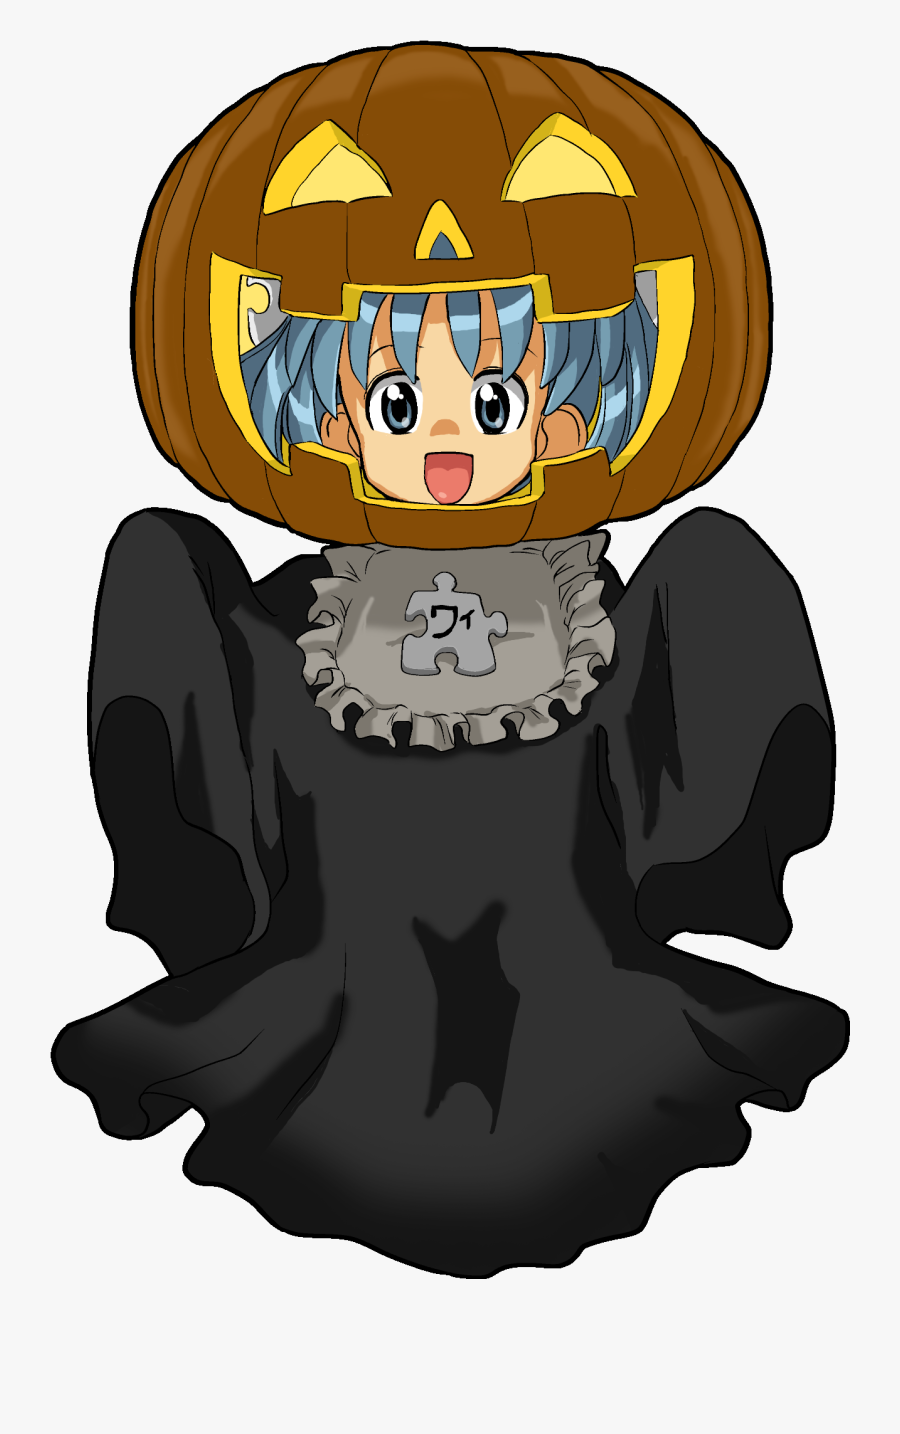 Wikipe-tan Dressed In A Halloween Costume - Halloween Costume, Transparent Clipart